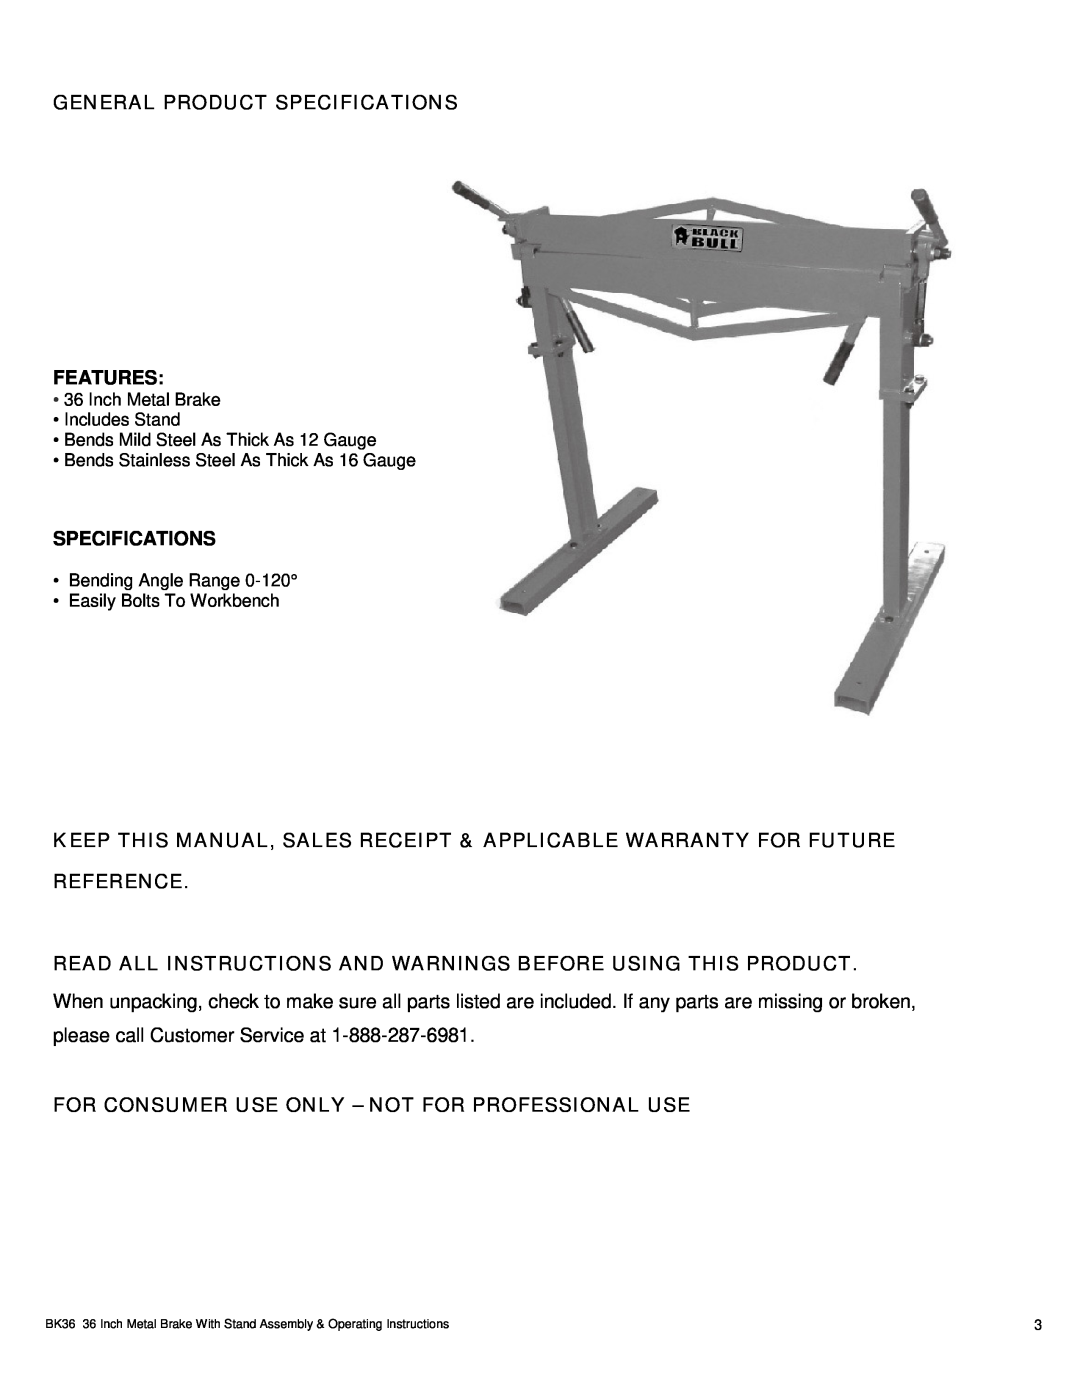 Buffalo Tools BK36 operating instructions Inch Metal Brake Includes Stand, Bends Mild Steel As Thick As 12 Gauge 